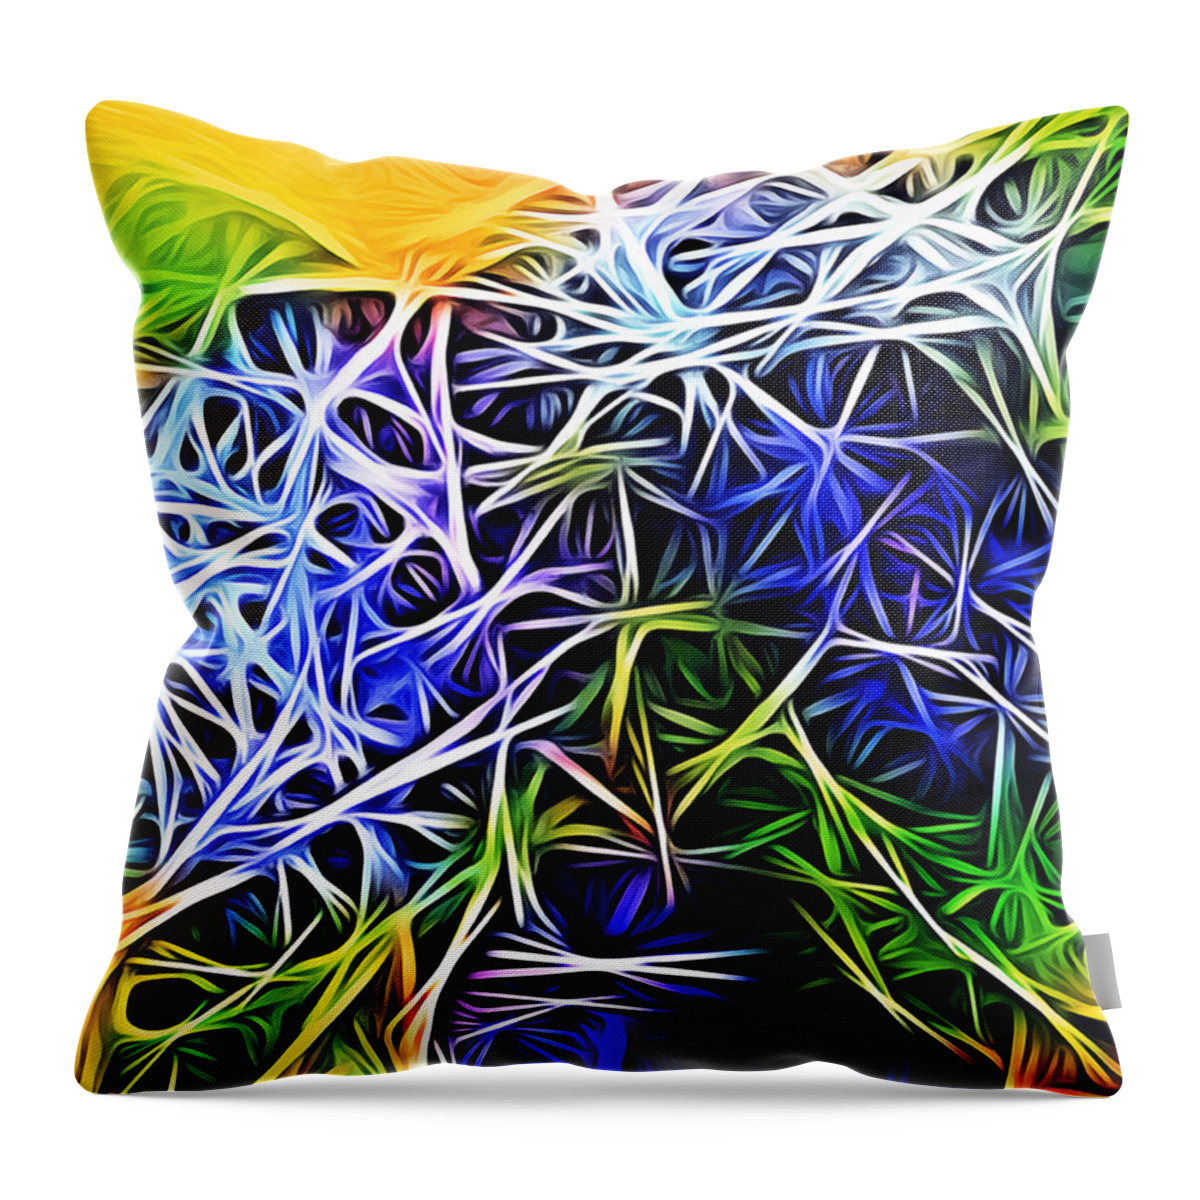 Chaos Throw Pillow featuring the digital art Infinitivi by Jeff Iverson